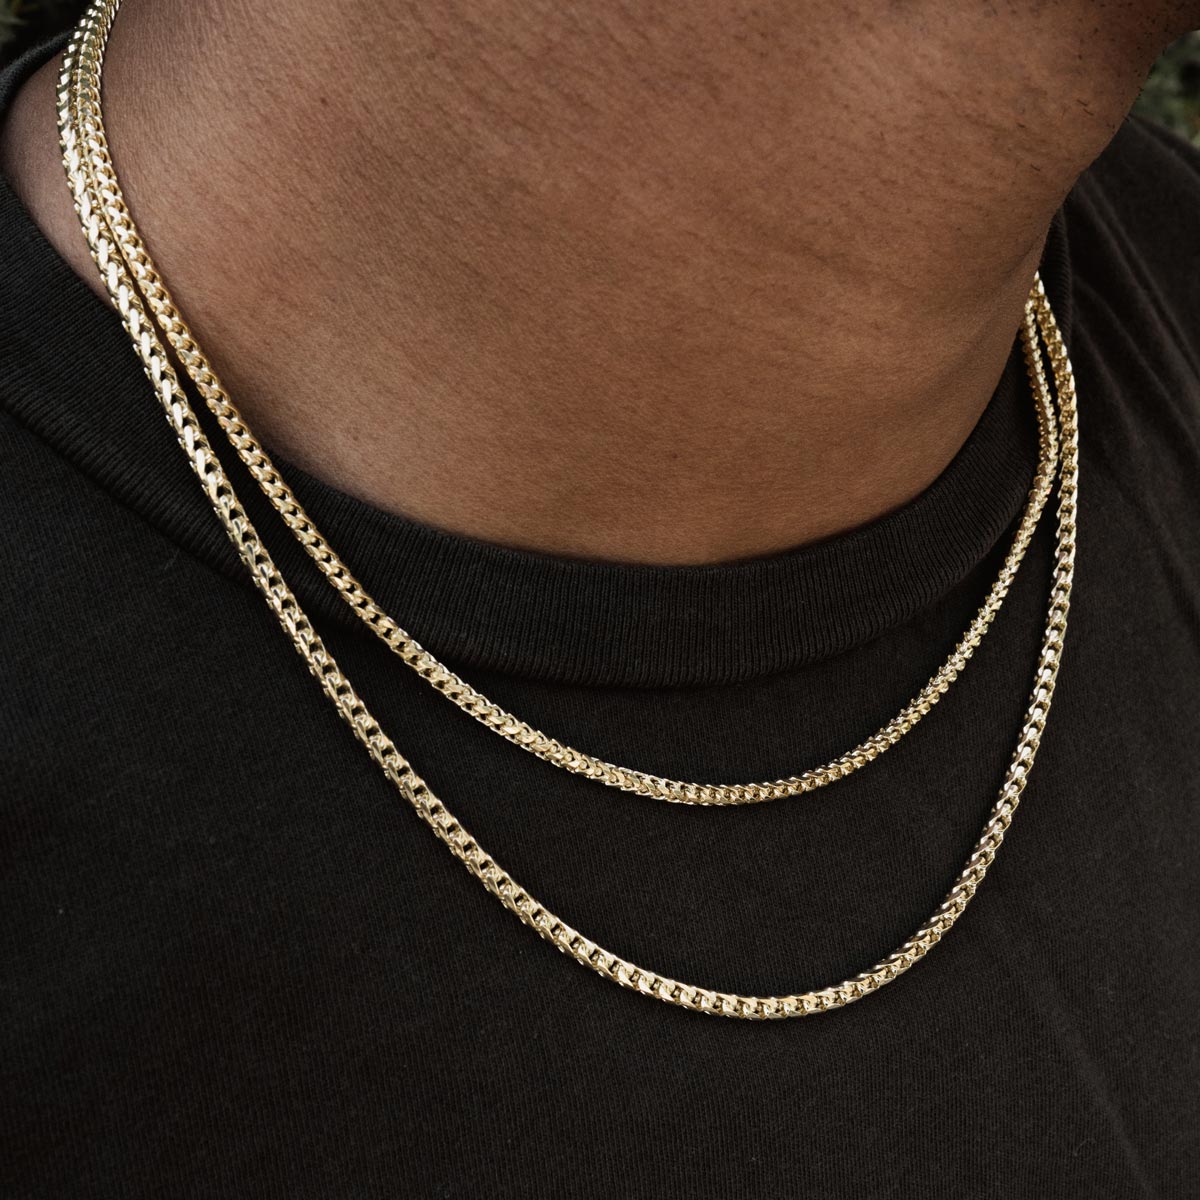 10k & 14k Solid Gold Chains - 100% Real Gold | The Gold Gods